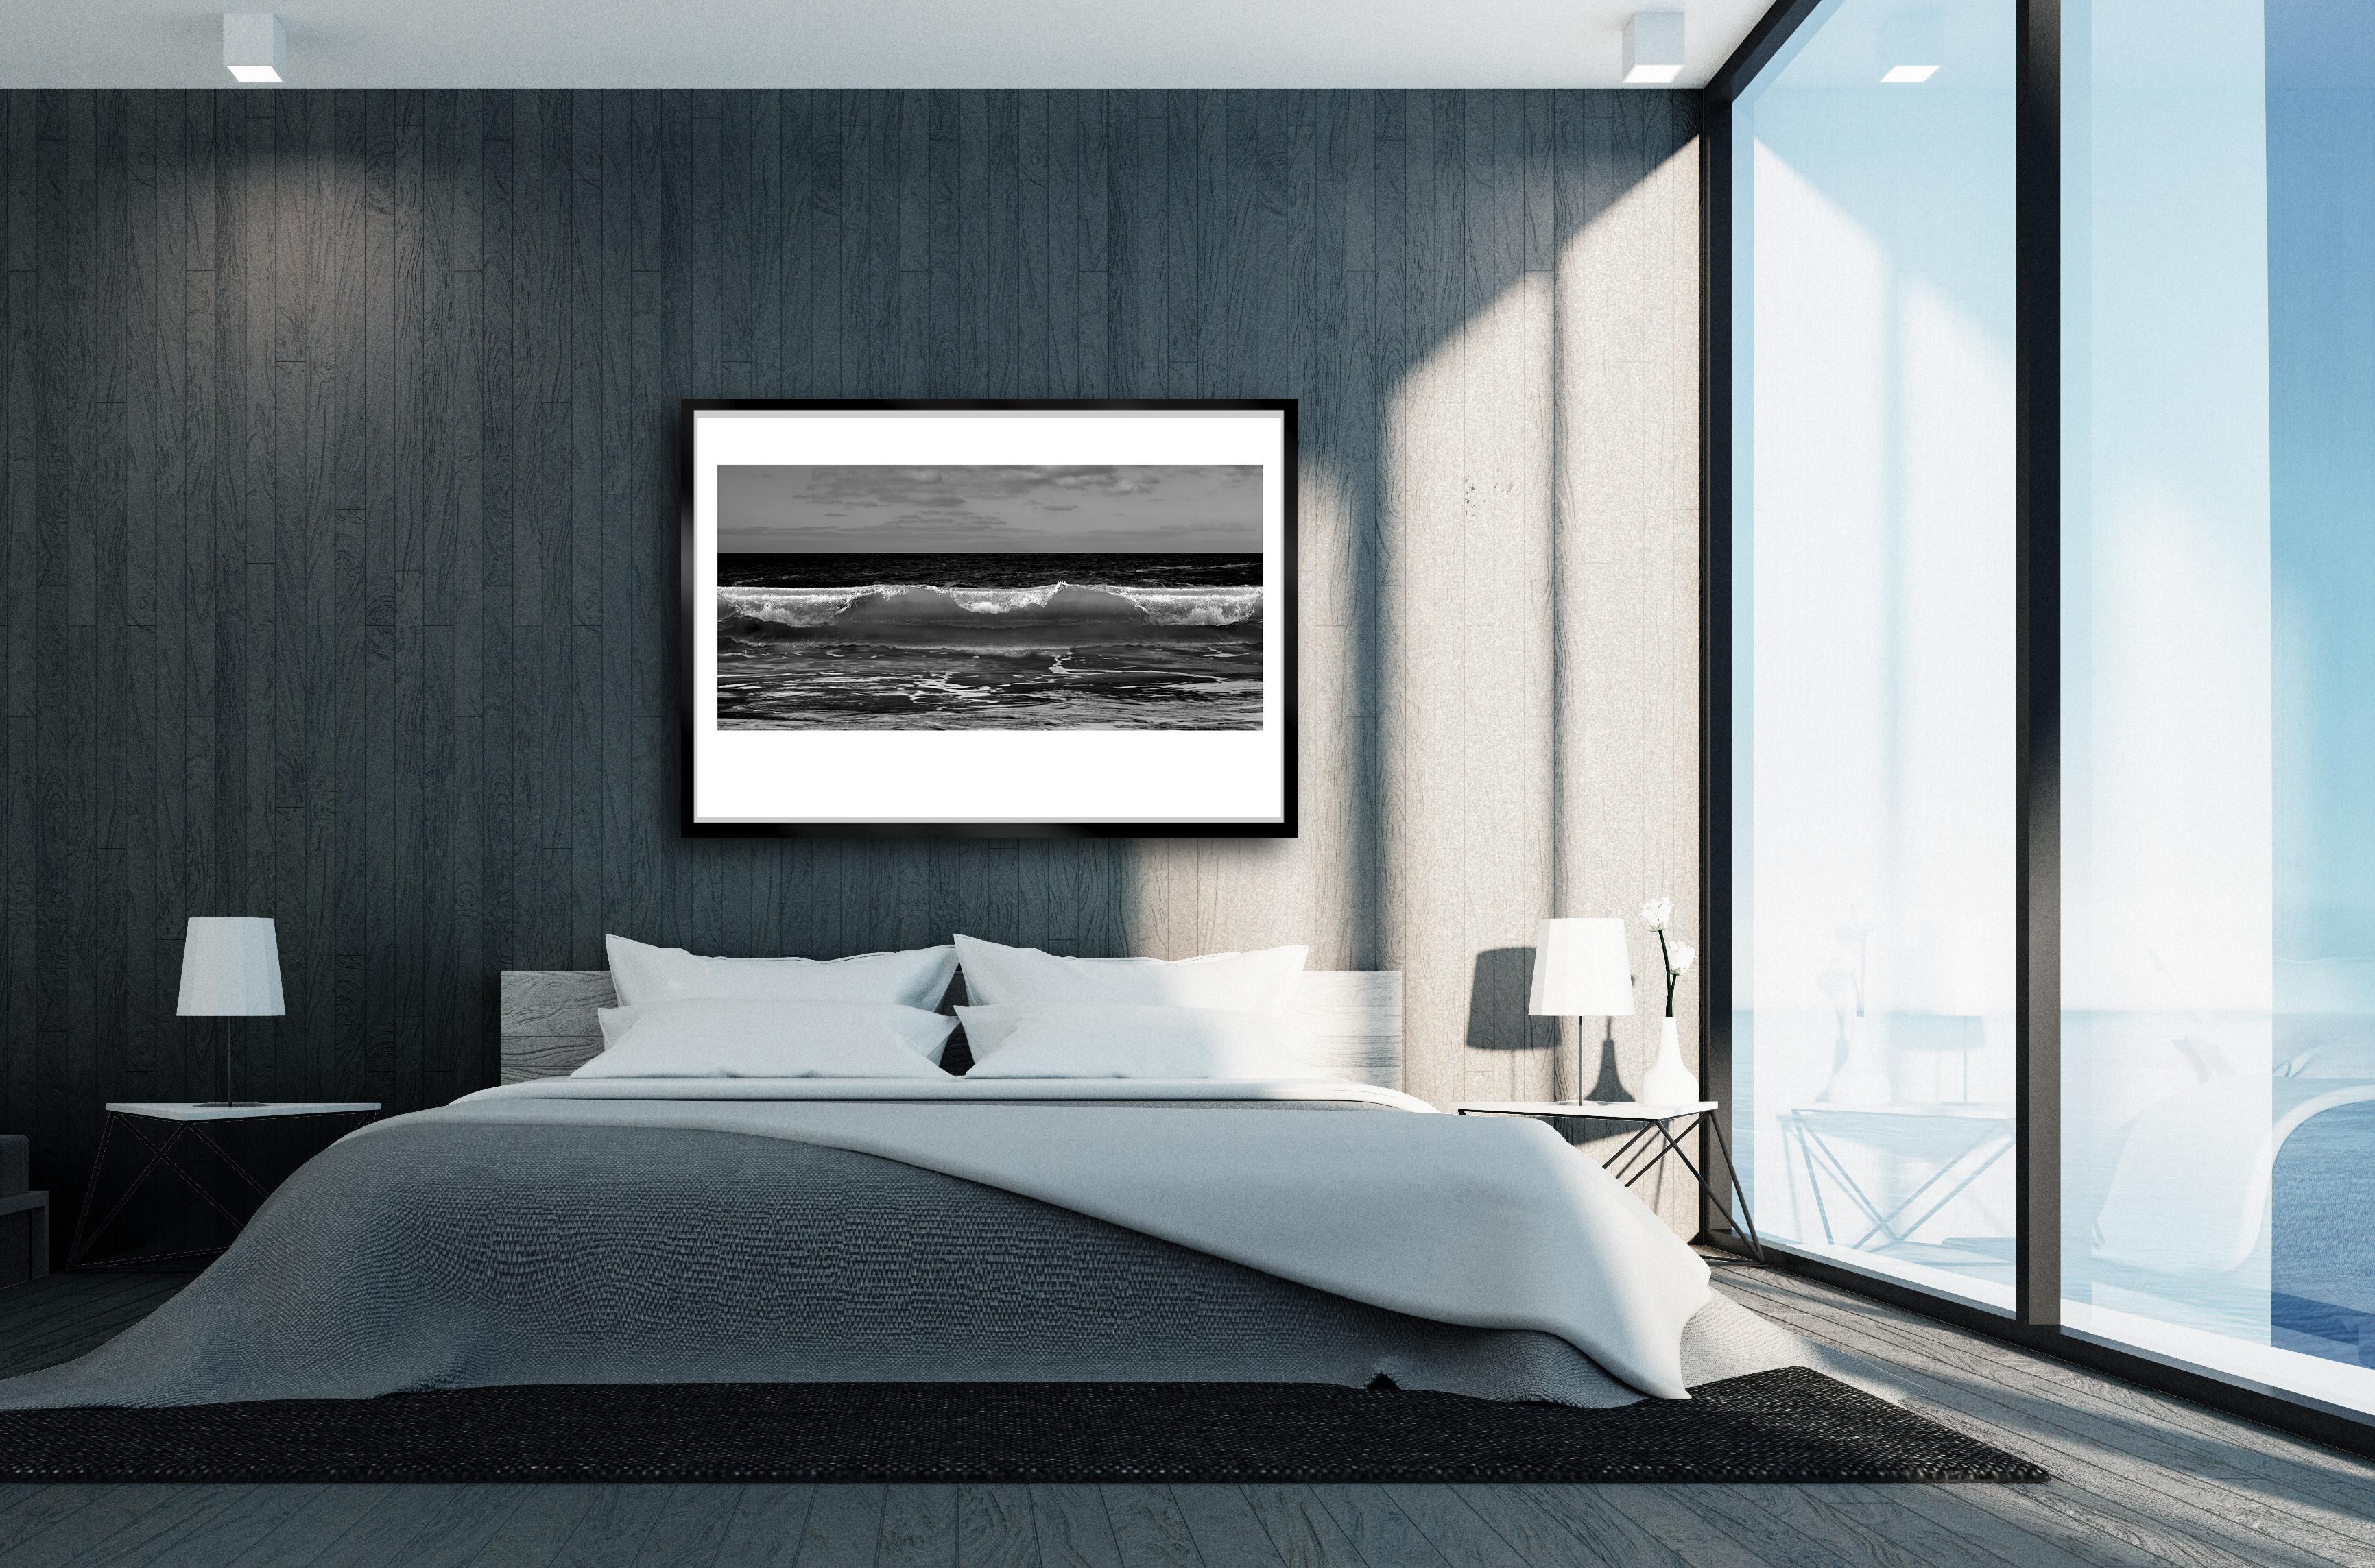 Wave - Signed limited edition print, Black and white, sea, Oversize still life - Photograph by Ian Sanderson